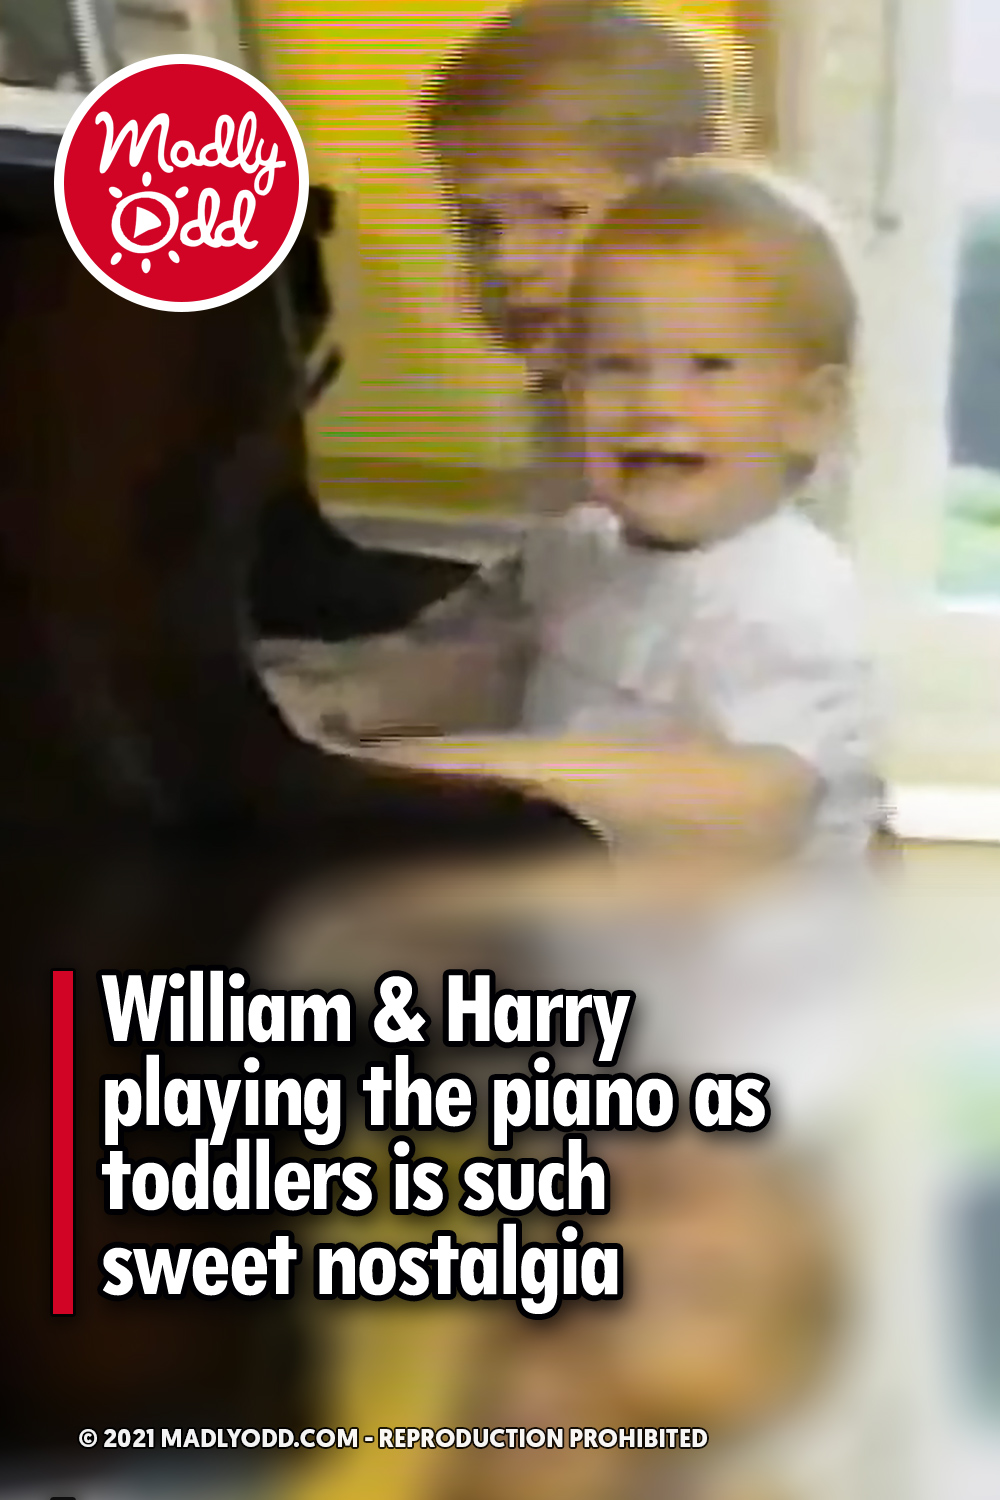 William & Harry playing the piano as toddlers is such sweet nostalgia